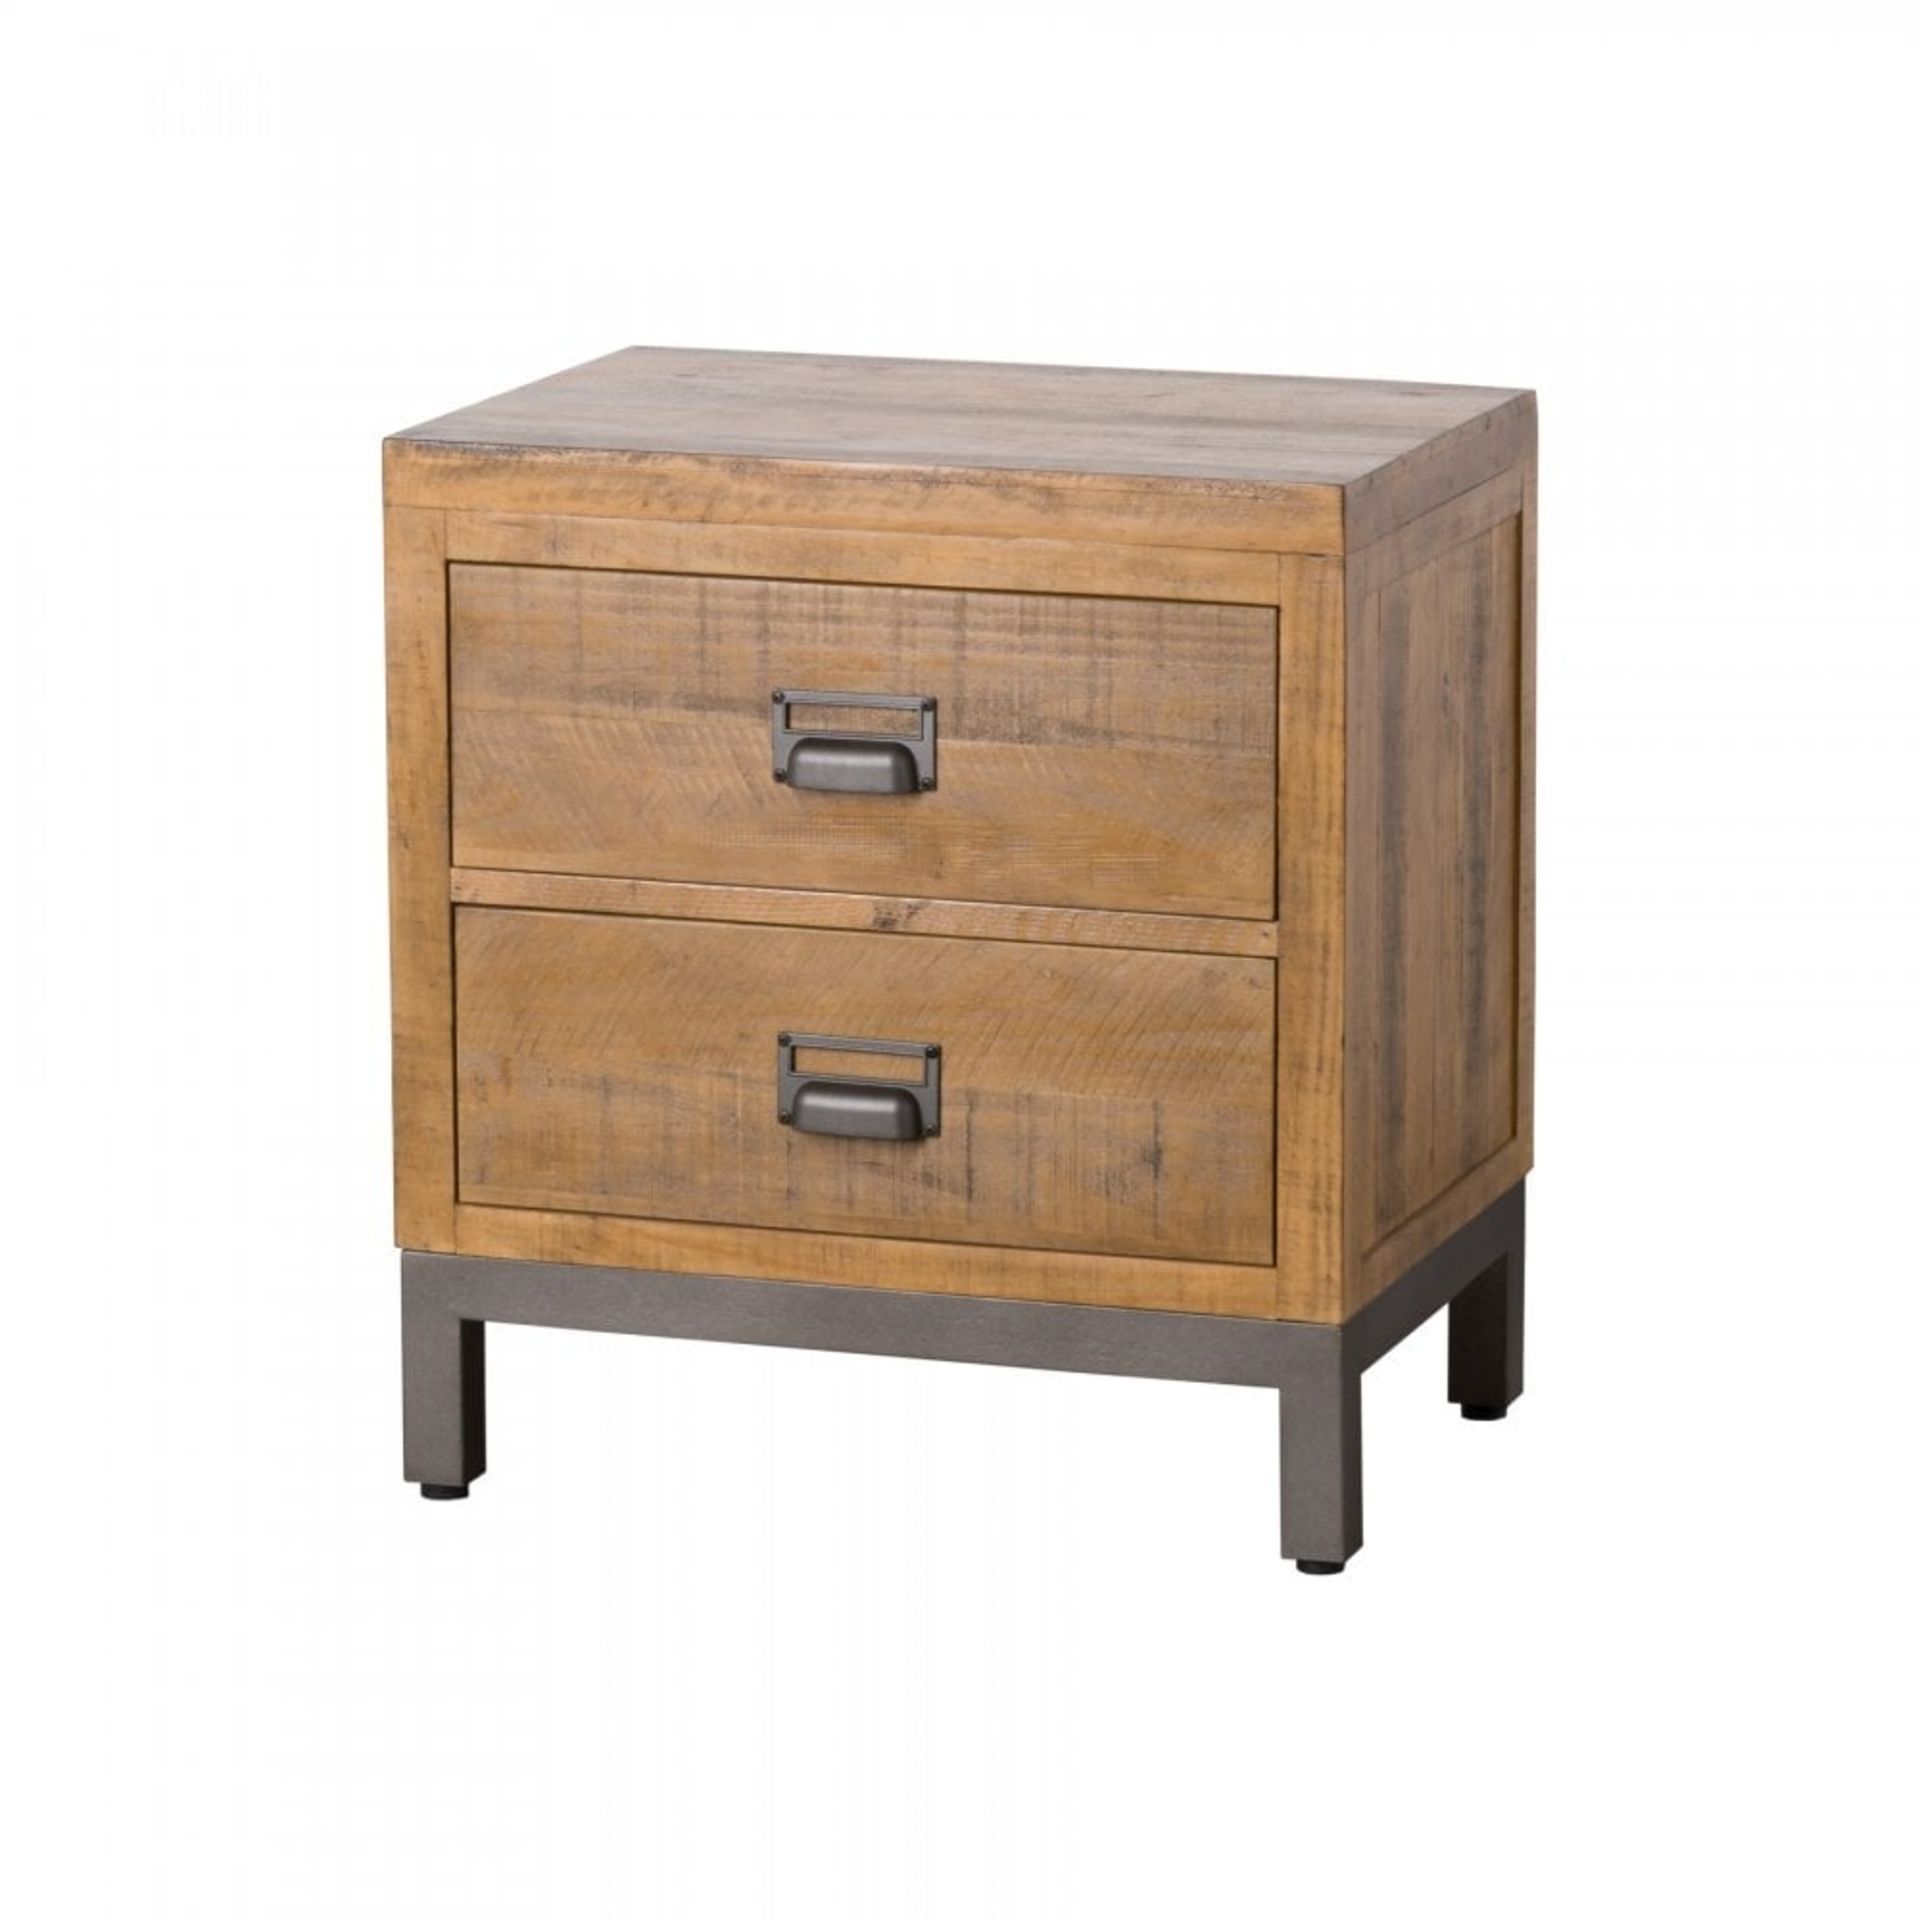 Draftsman Collection Two Drawer Bedside The Combination Of Raw And Organic Textures Of A Solid - Bild 2 aus 3